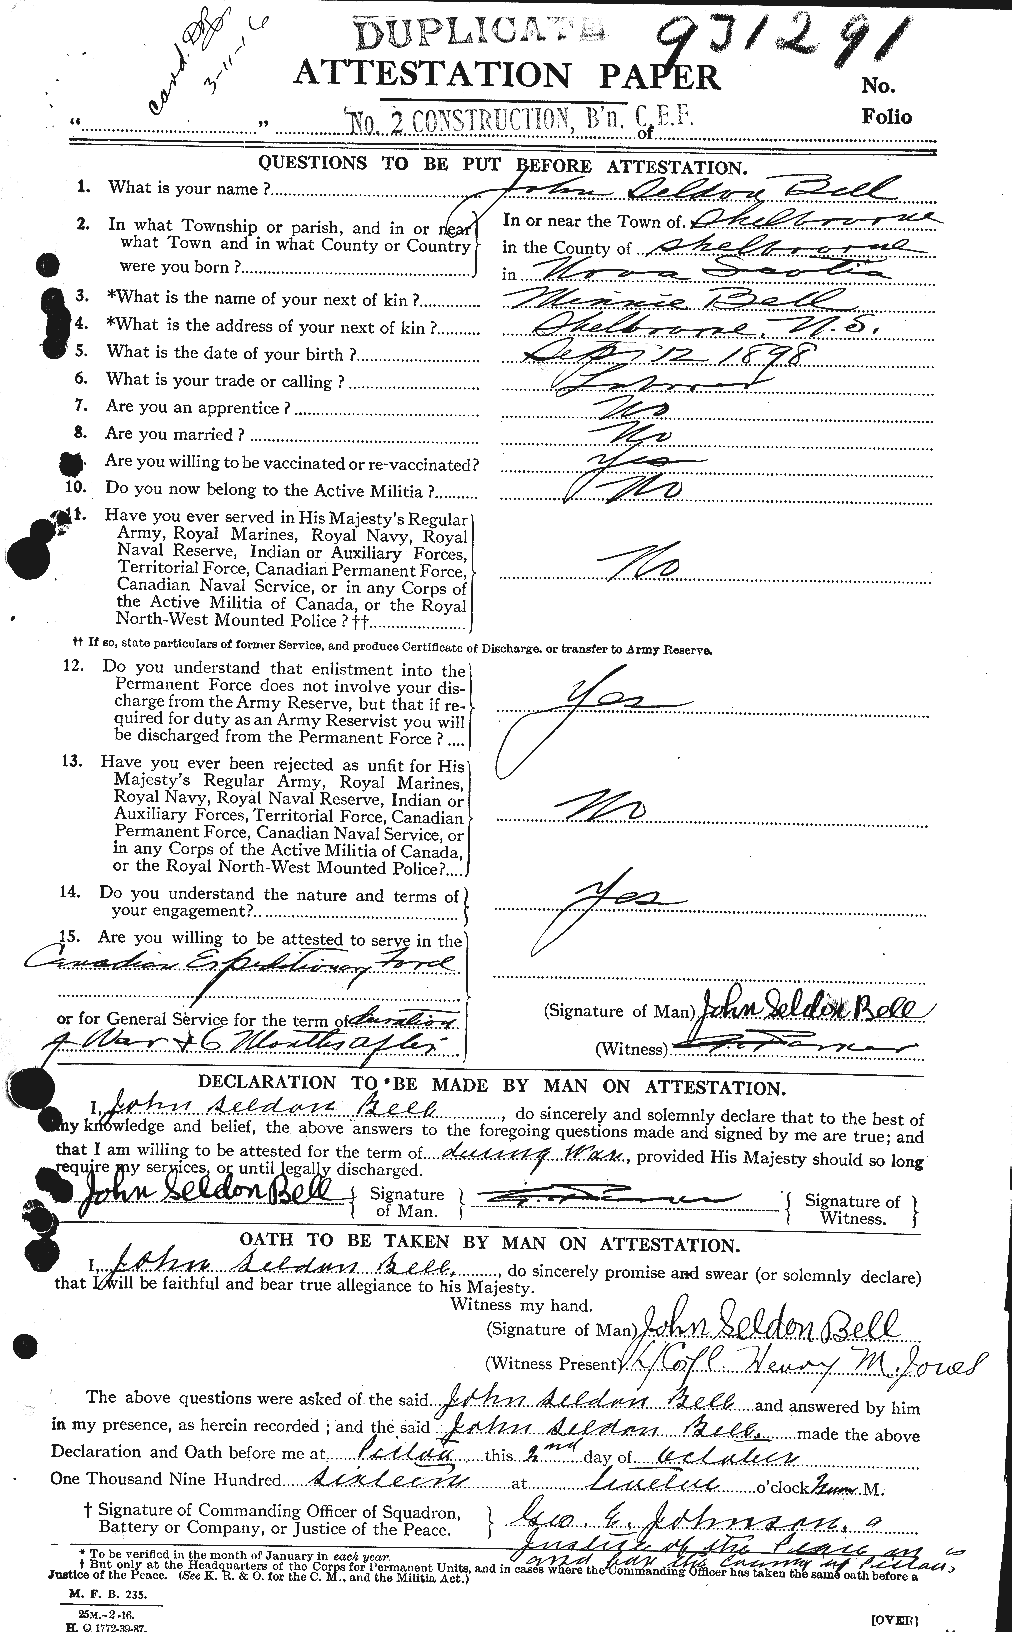 Personnel Records of the First World War - CEF 234450a